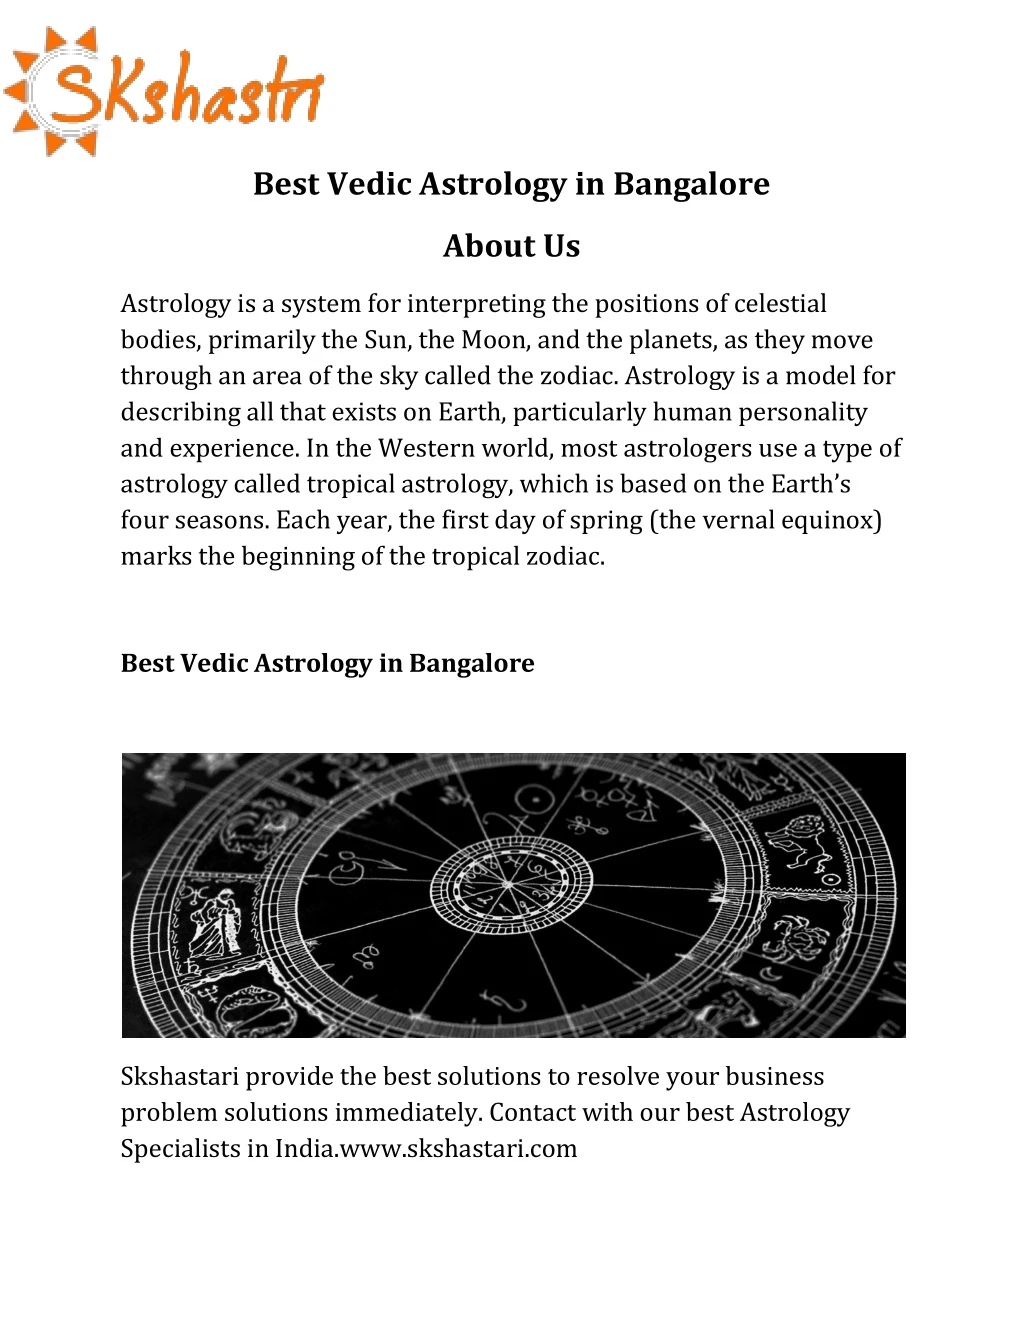 best vedic astrology in bangalore